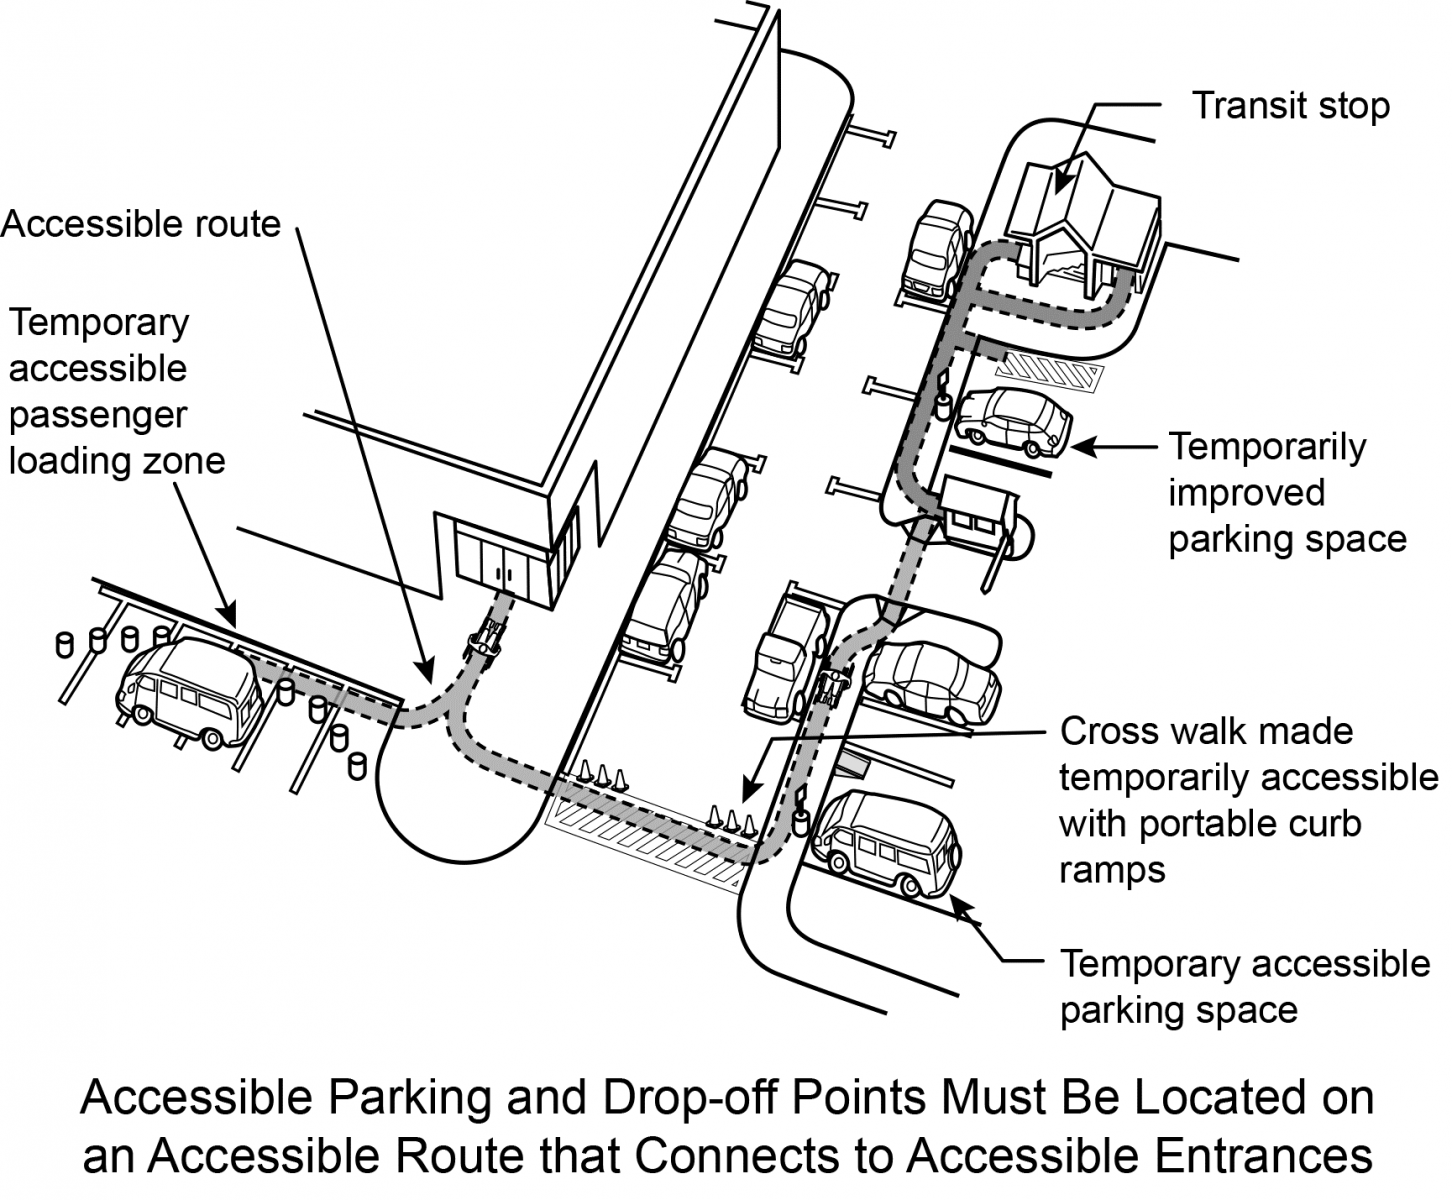 Figure 14: The accessible route connects accessible parking, drop-off points, and entrances.